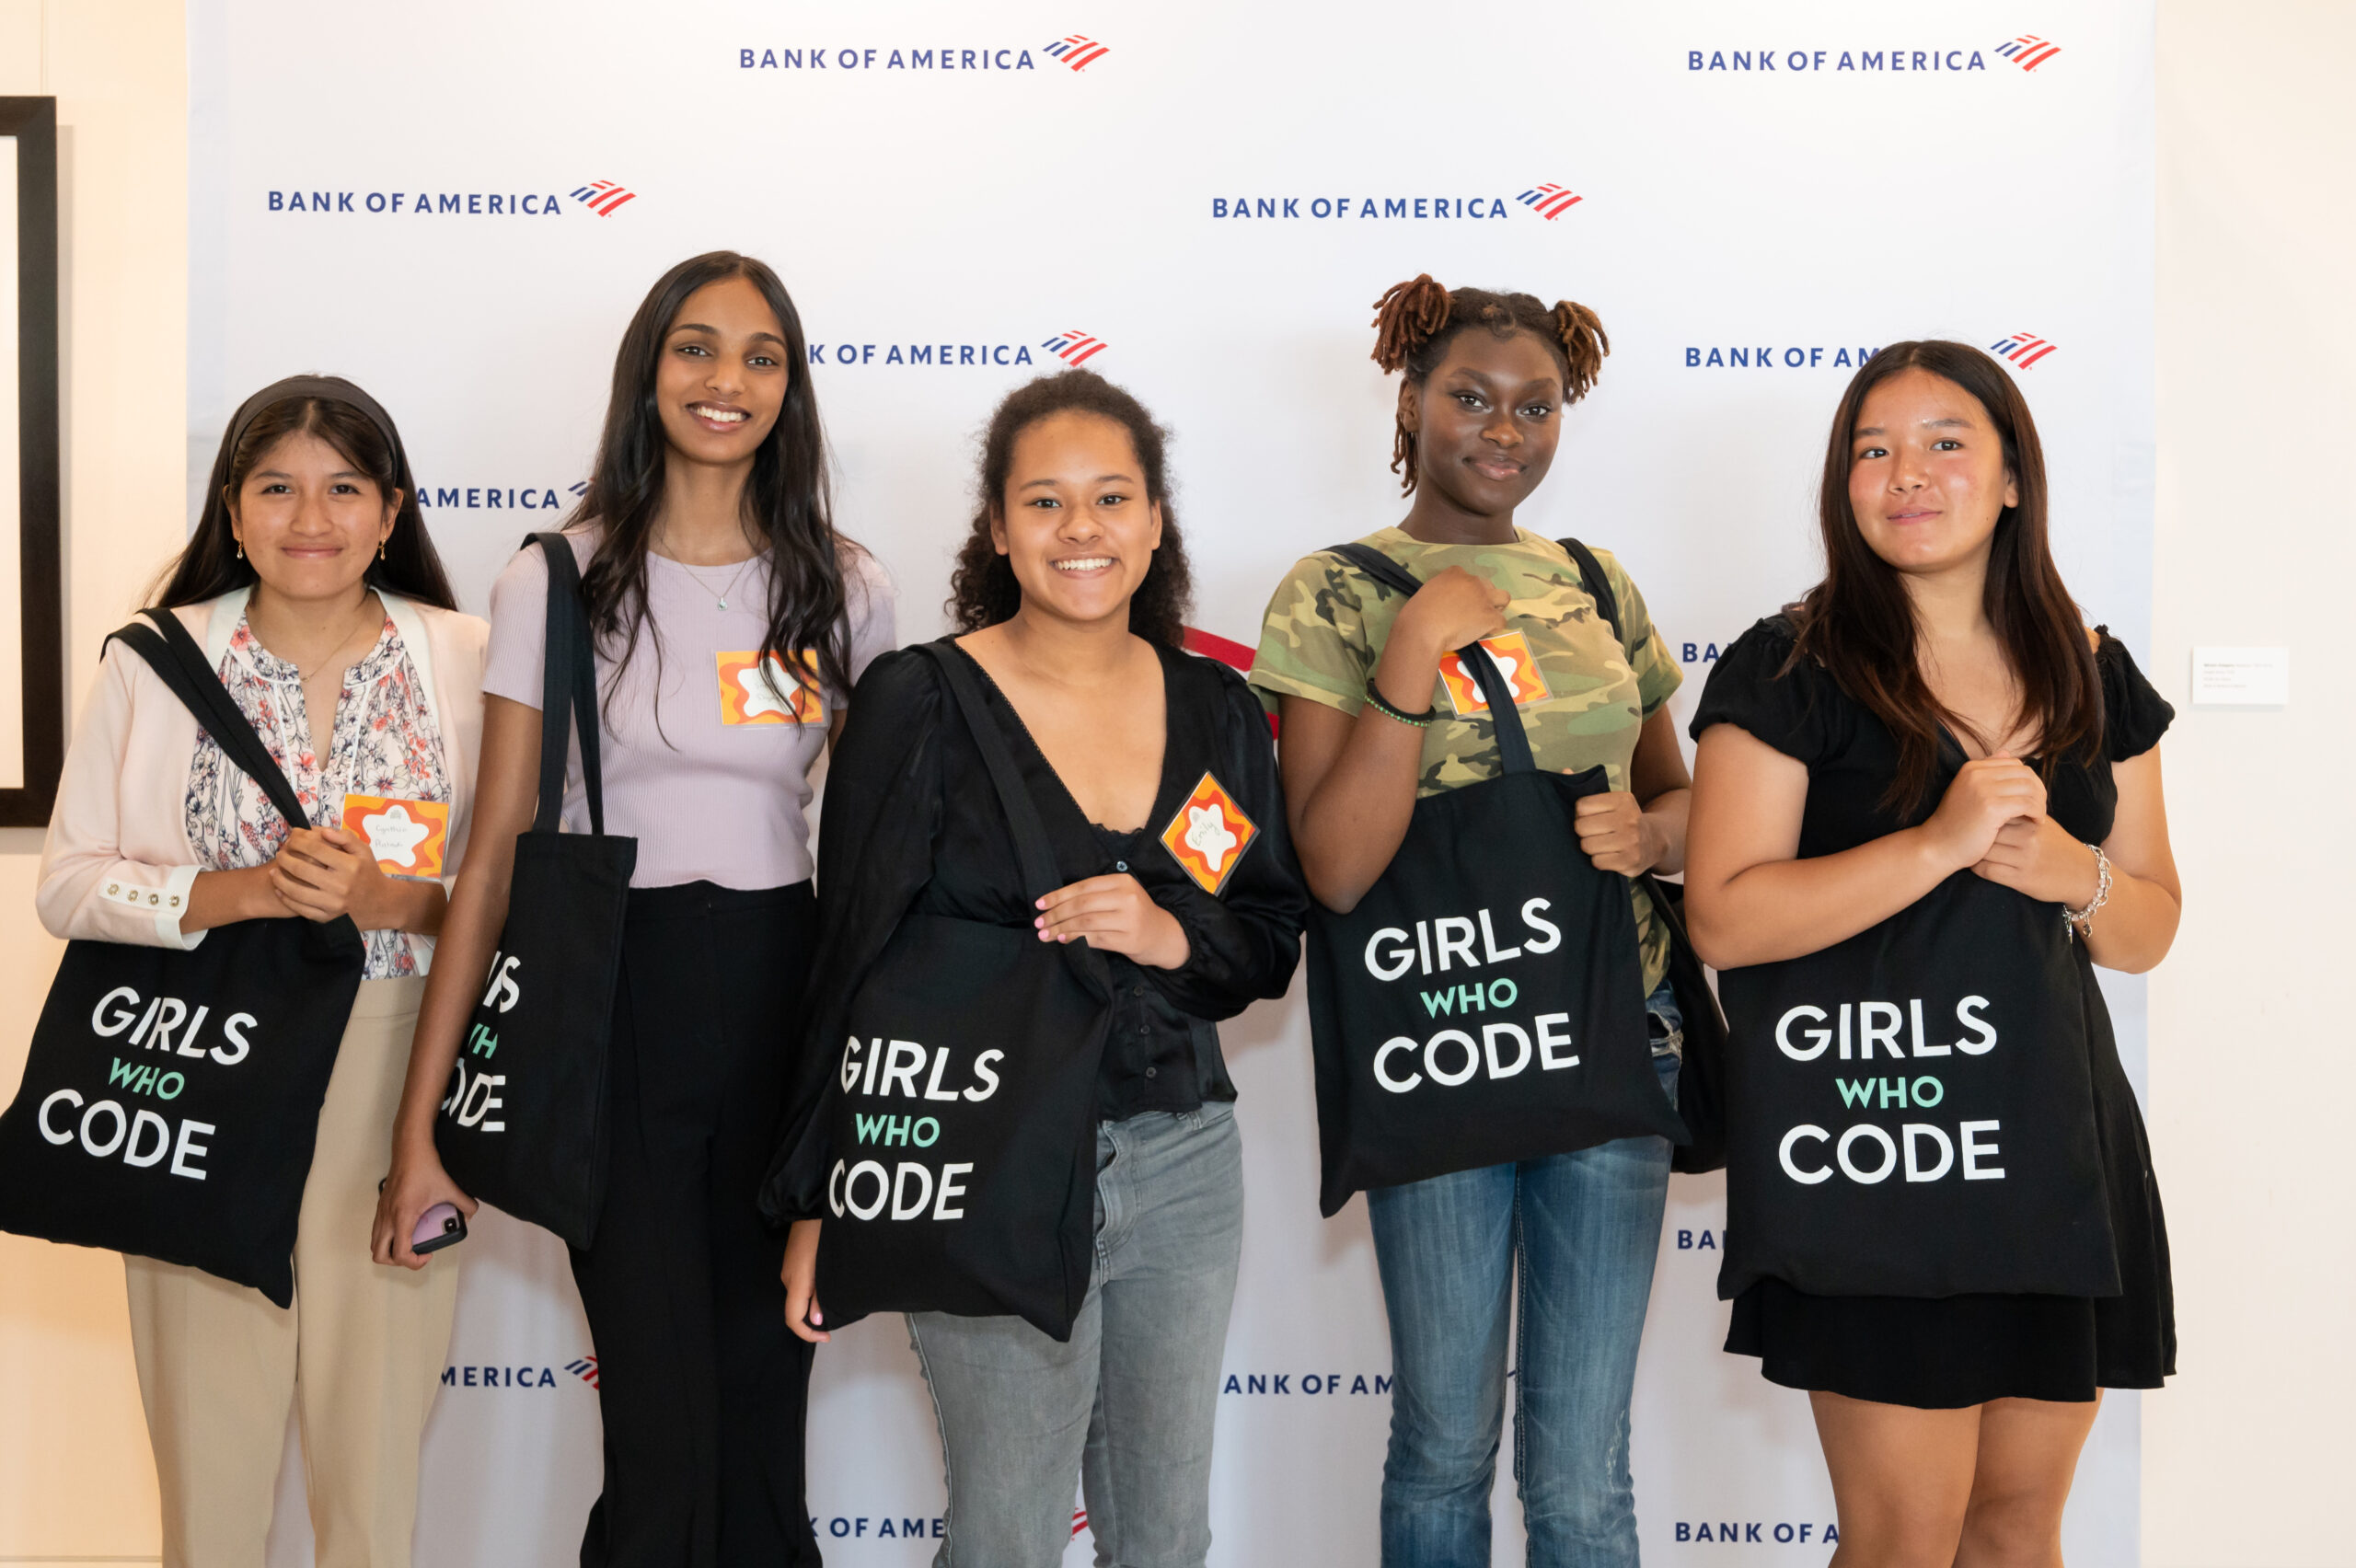 Women, technology, and fighting underrepresentation: A Bank of America and Girls Who Code story